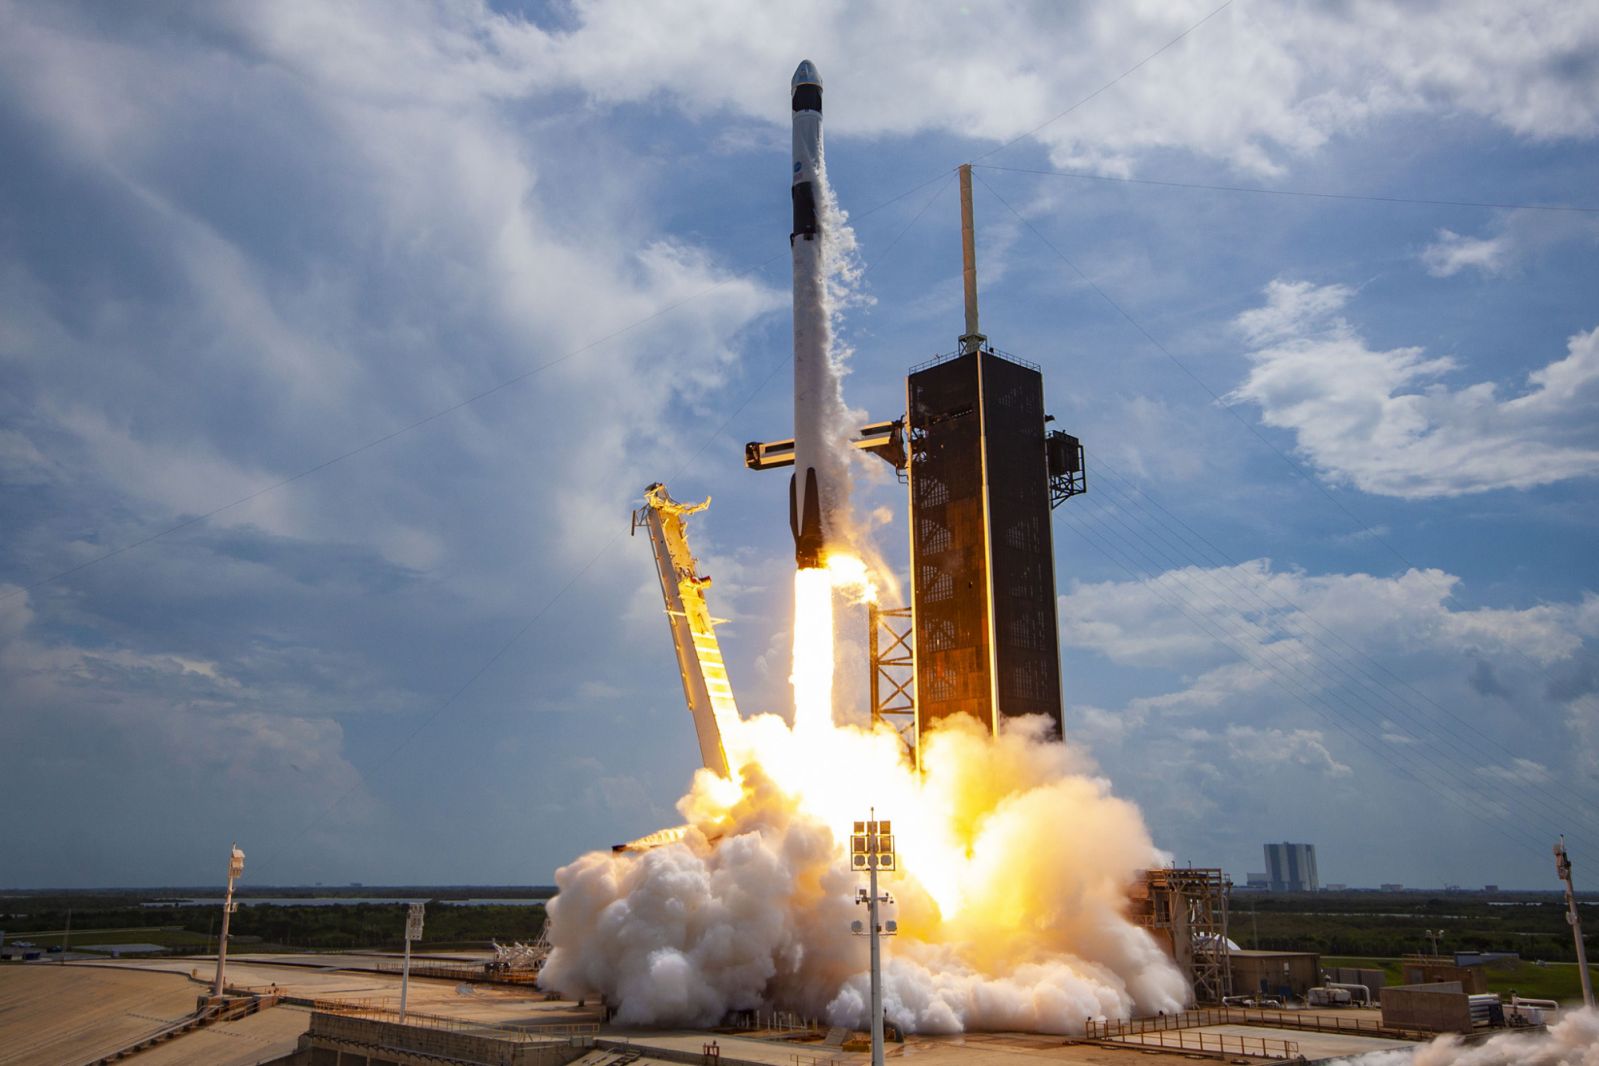 Planters International's first satellite was launched into orbit as part of SpaceX’s ninth dedicated smallsat rideshare program mission (Photo: Getty Images)